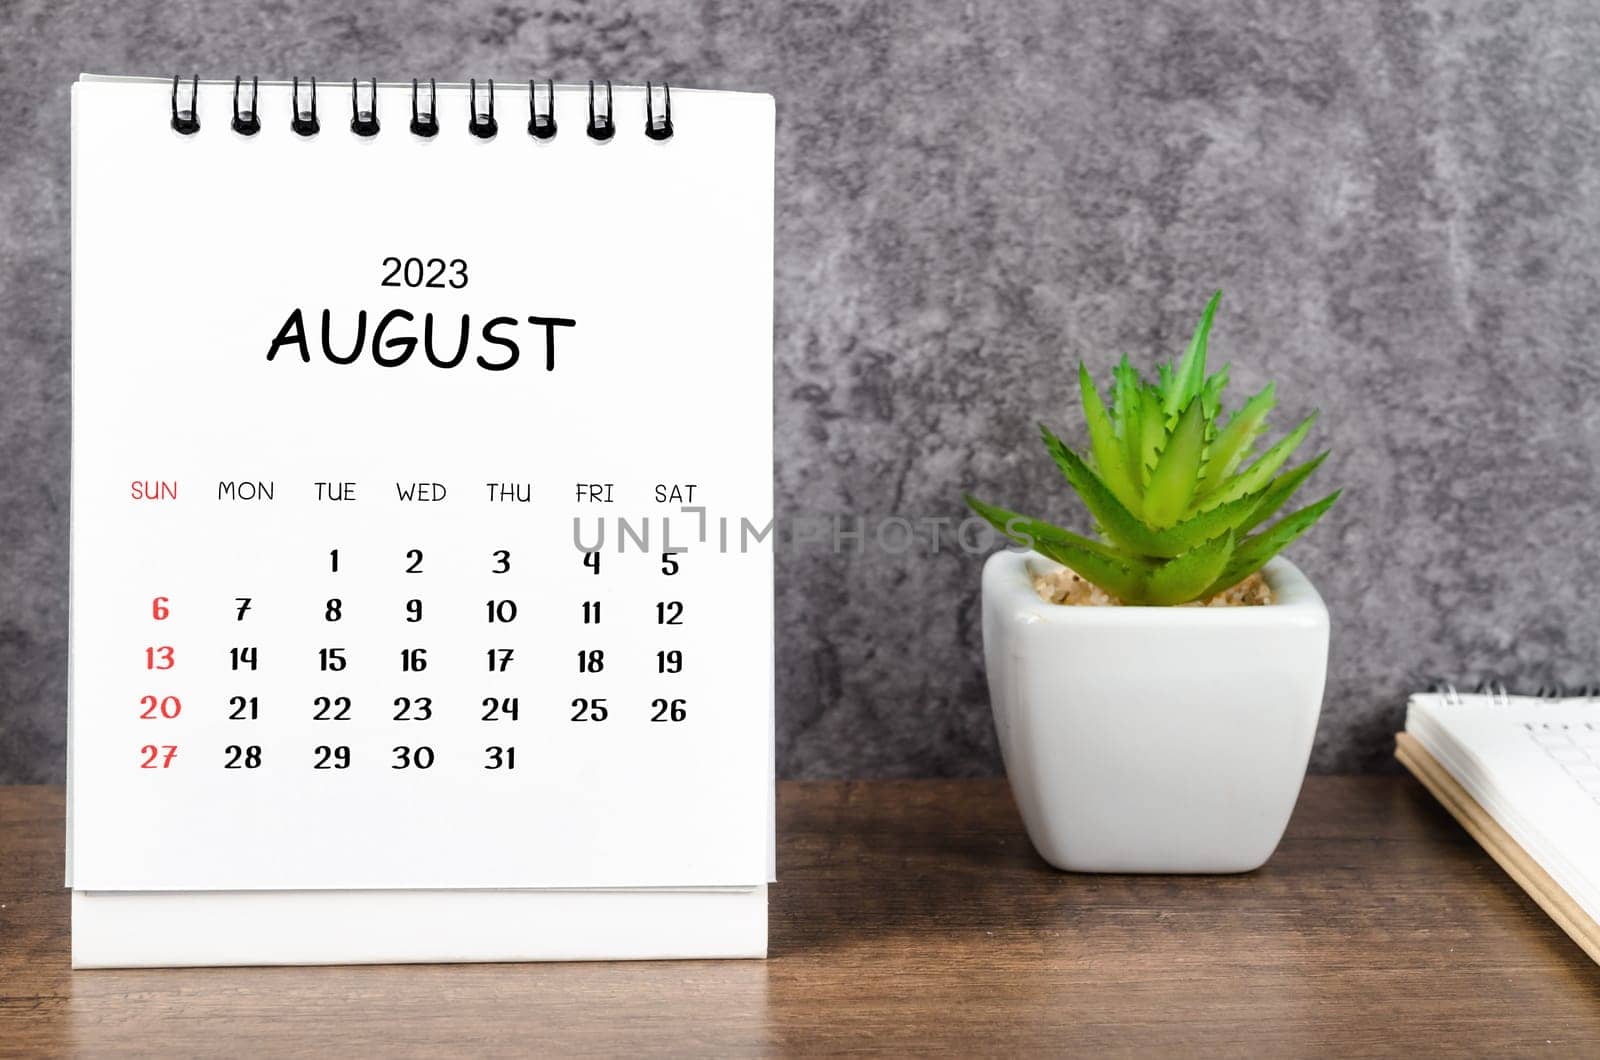 August 2023 Monthly desk calendar for 2023 with diary on wooden table.